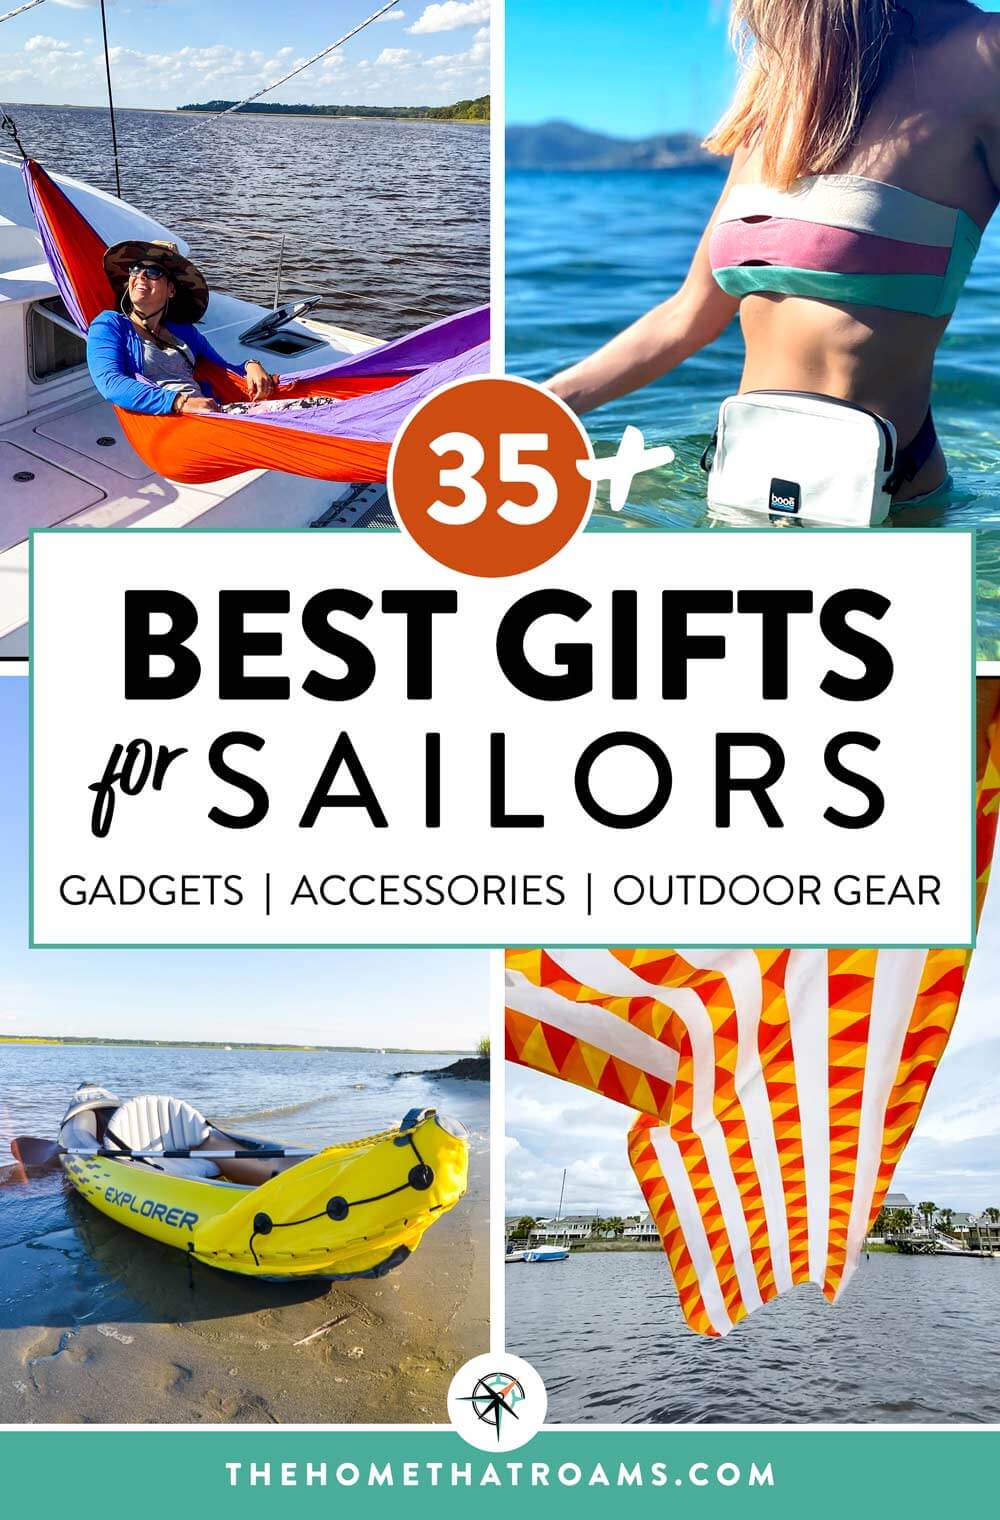 Pinterest image of sailing gifts - hammock installed on a sailboat, waterproof bag on a woman's waist, kayak on a beach shore, and towel waving in the wind on a boat.